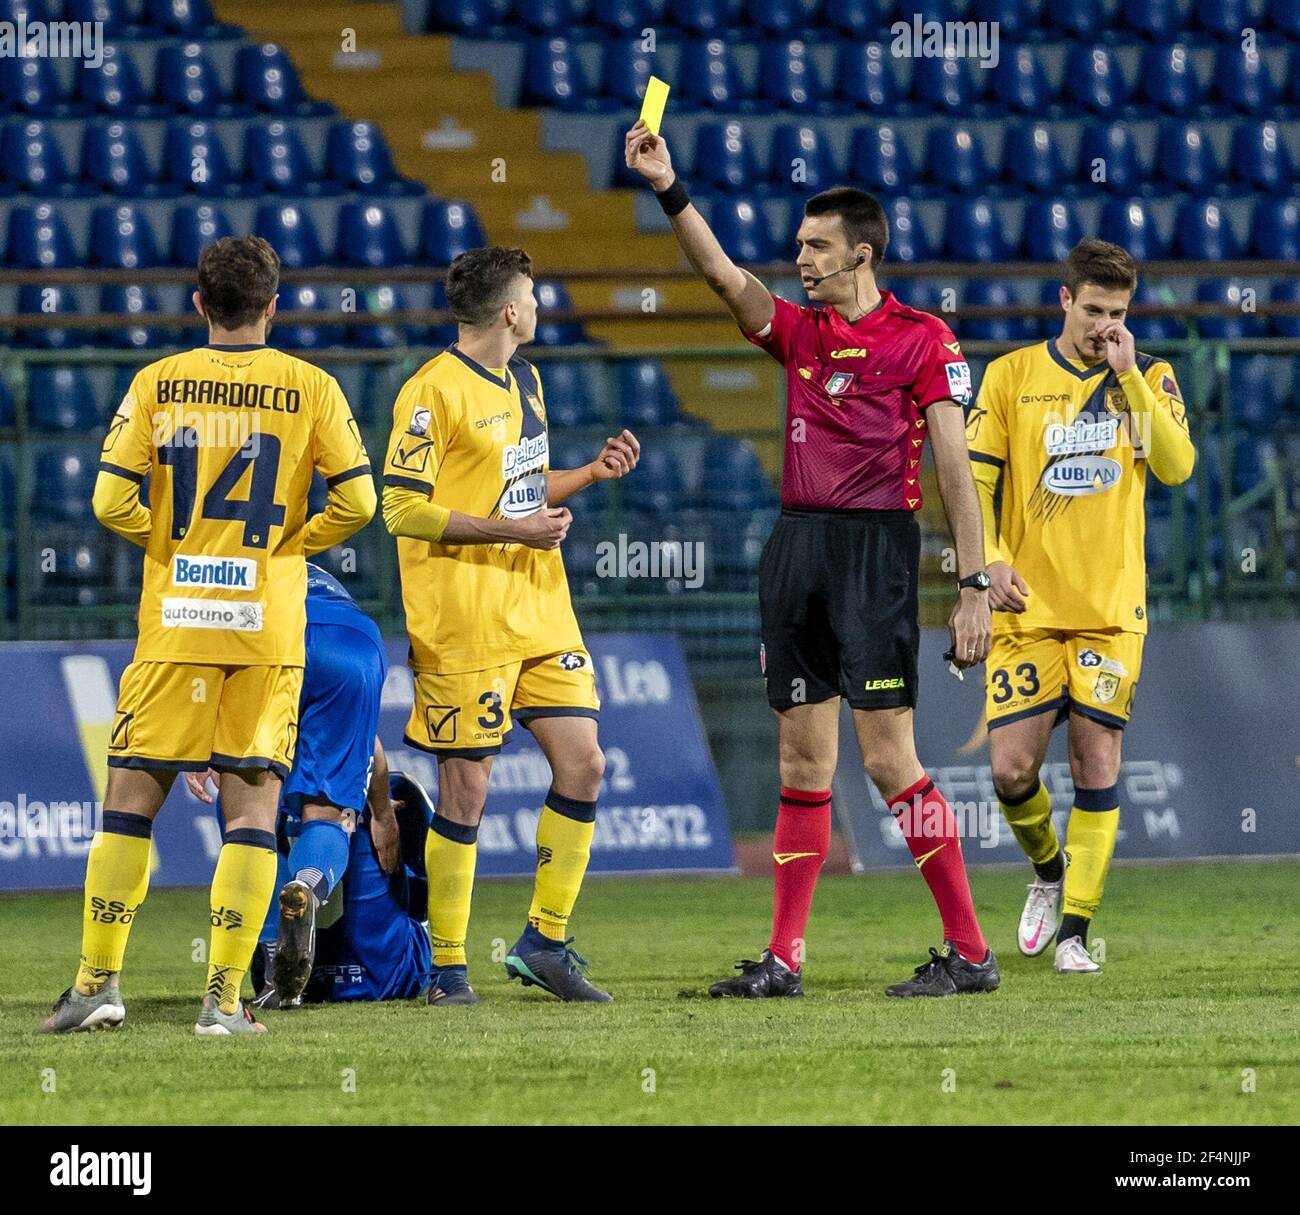 Pagani, Italy. 21st Mar, 2021. The referee extracts the yellow card at the address of Alberto Rizzo (3) S.S. Juve Stabia.Serie C Championship - Marcello Torre Stadium, 32nd day Group C. The match between Paganese and Juve Stabia ends with the final result of 1-3. (Photo by Alessandro Barone/Pacific Press/Sipa USA) (Photo by Alessandro Barone/Pacific Press/Sipa USA) Credit: Sipa USA/Alamy Live News Stock Photo